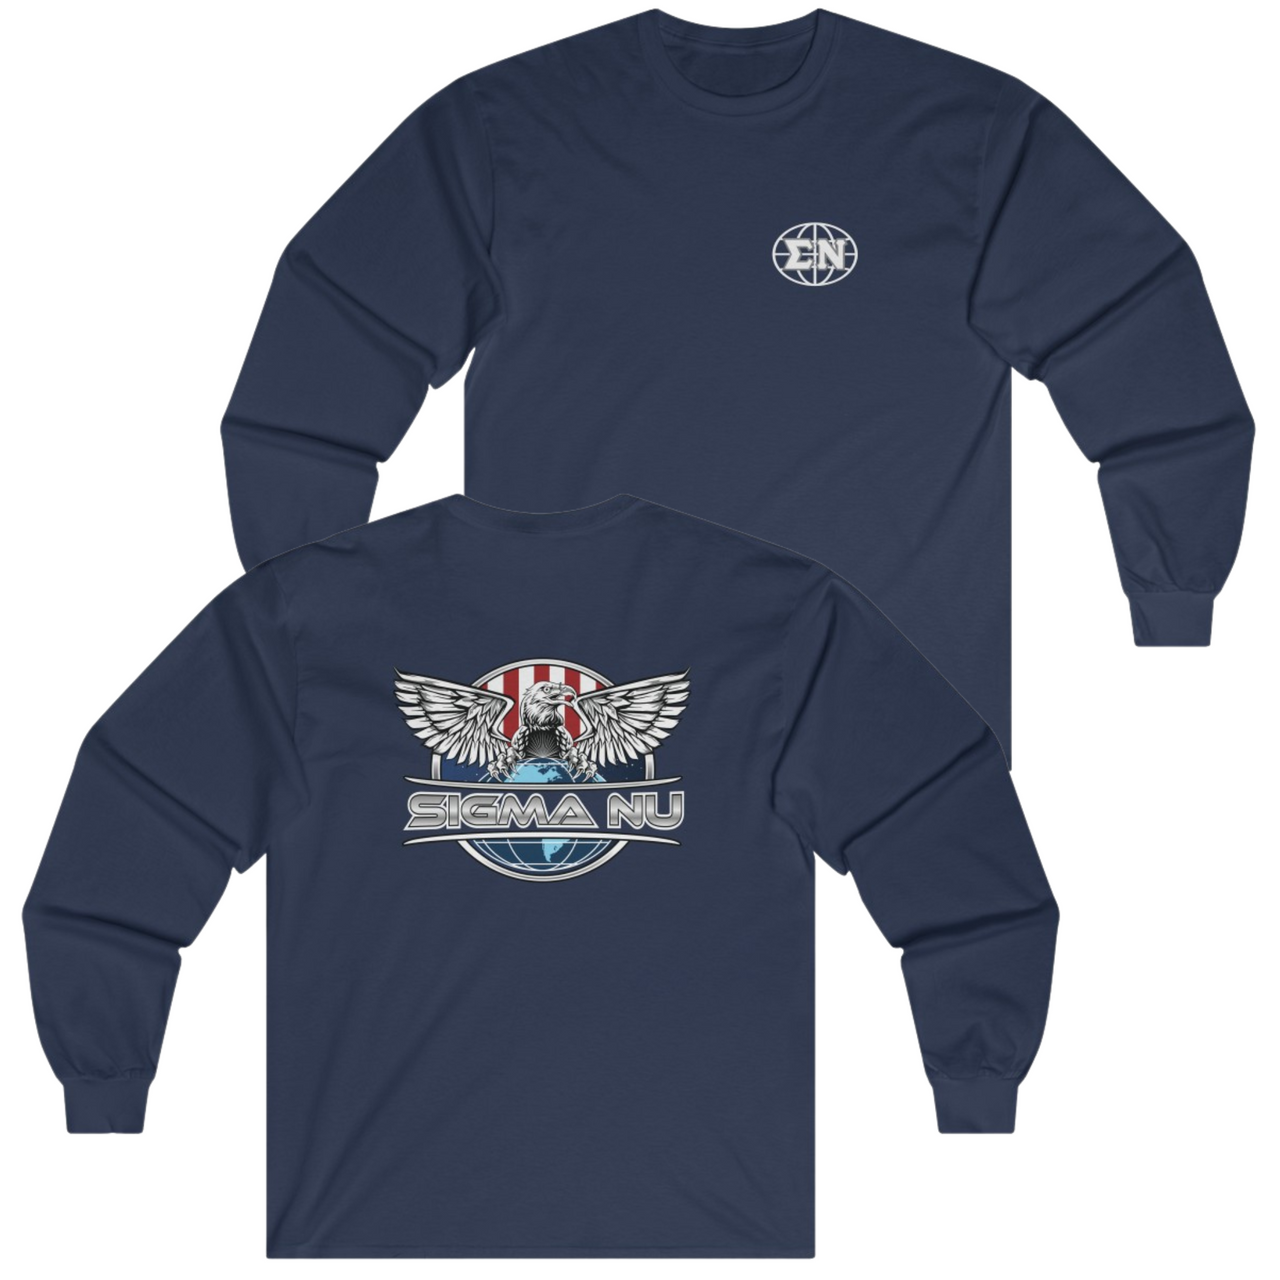 Navy Sigma Nu Graphic Long Sleeve | The Fraternal Order | Sigma Nu Clothing, Apparel and Merchandise